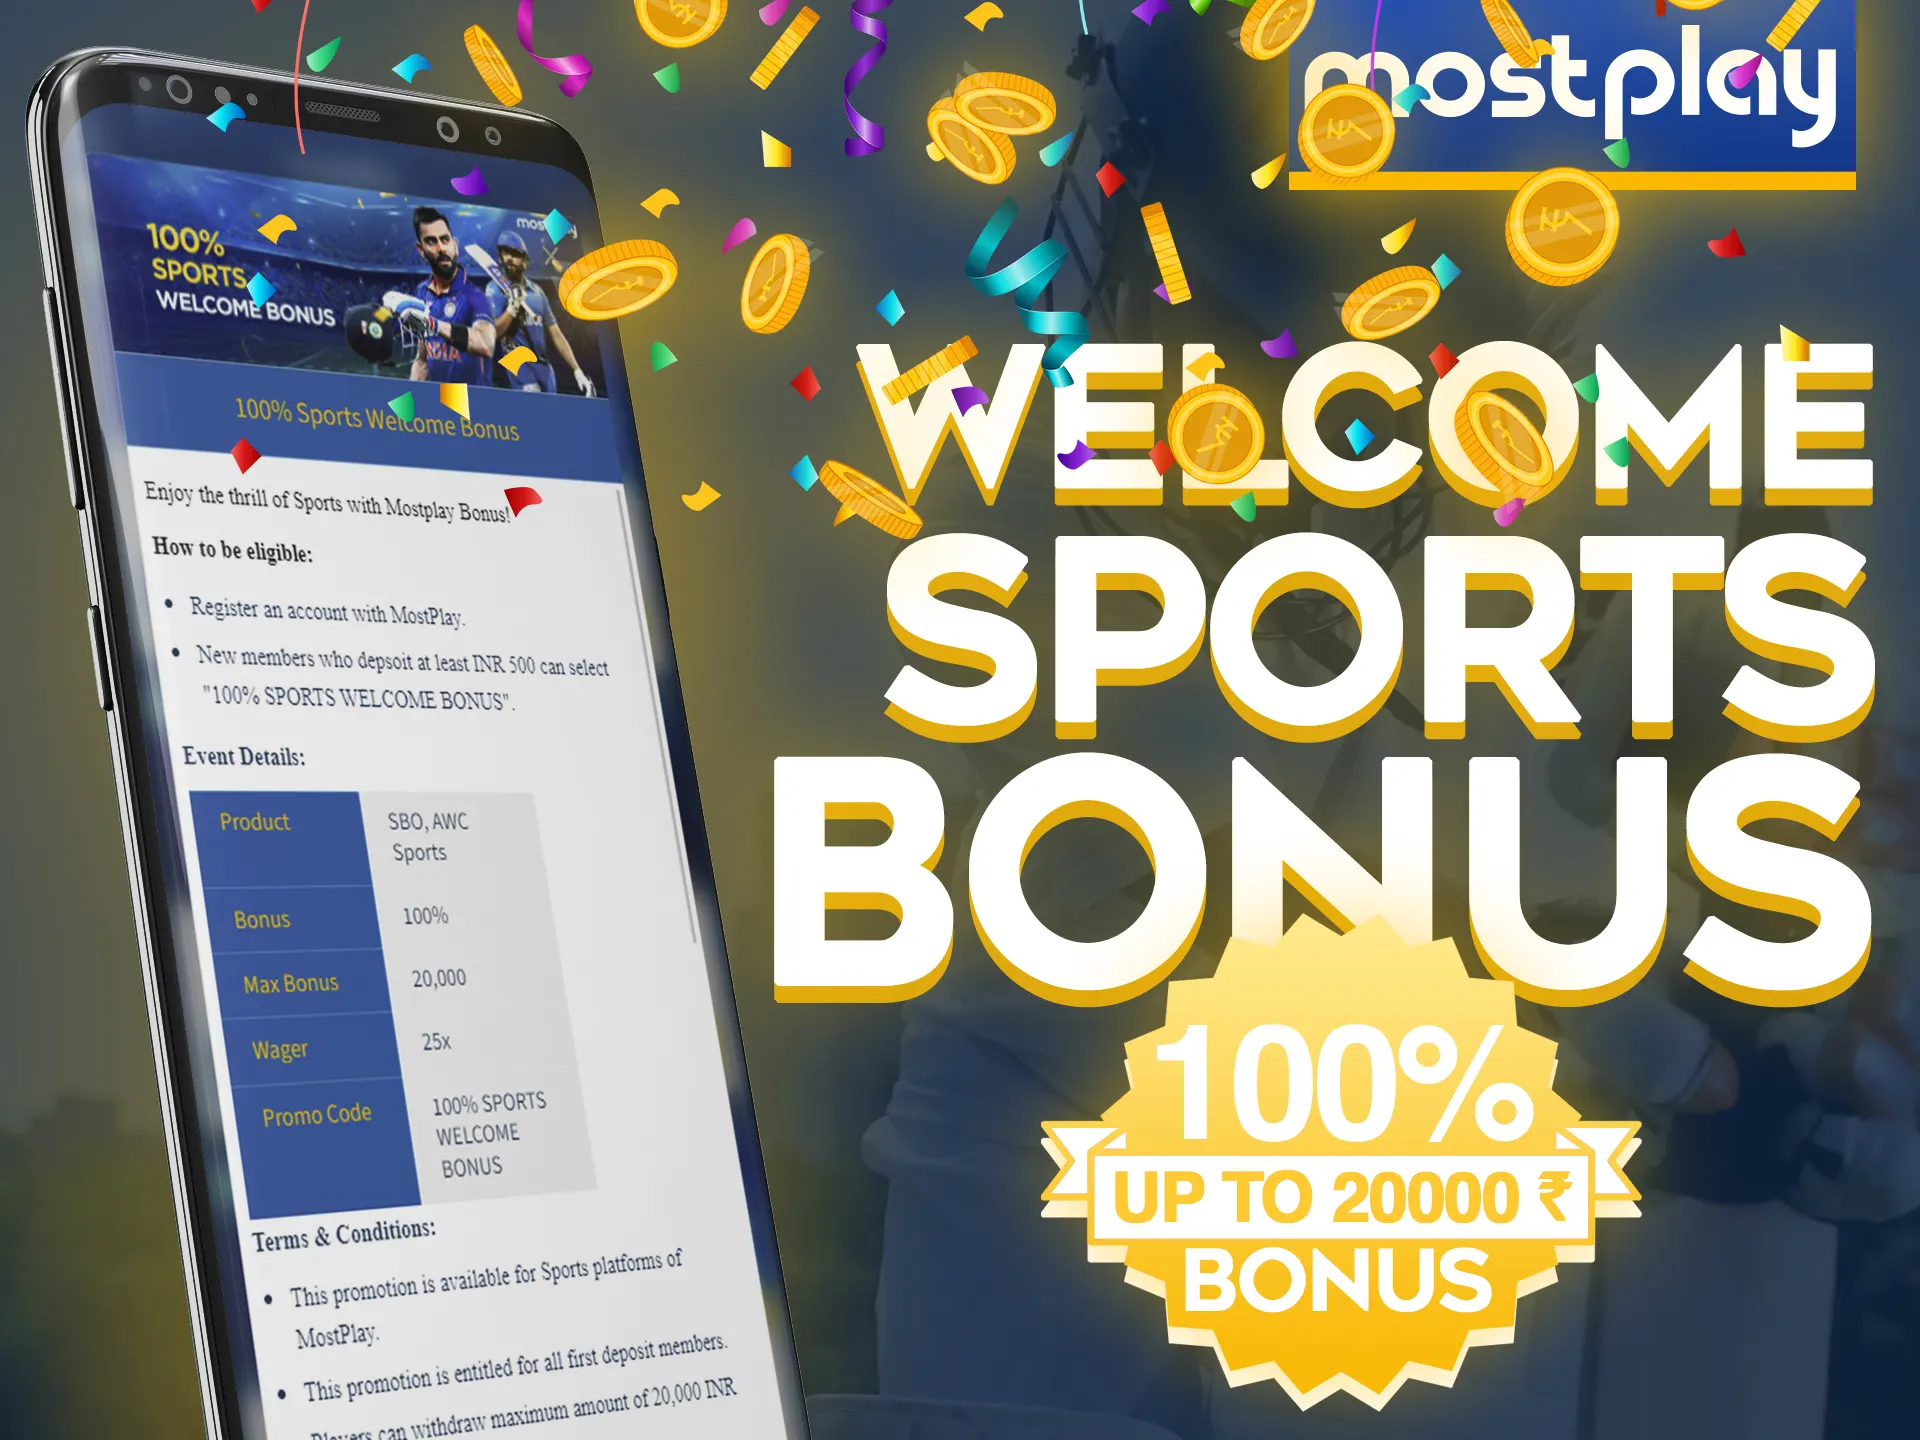 Get a Mostplay welcome bonus after the first deposit.